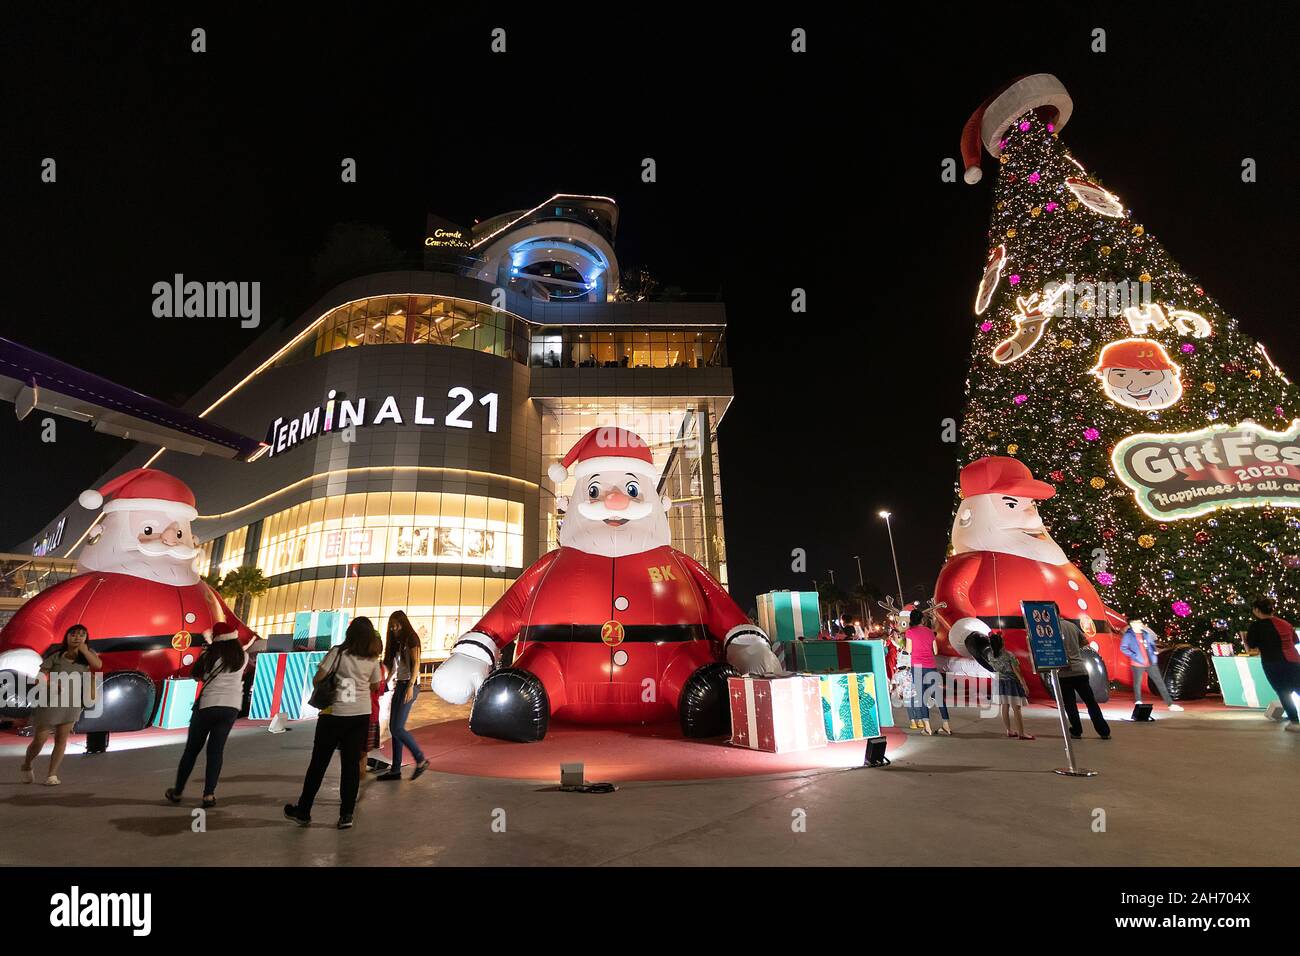 PATTAYA, THAILAND - DECEMBER 25, 2019: people enjoy for seasons greeting in front of Terminal21 shopping center with big Santa Claus doll Stock Photo